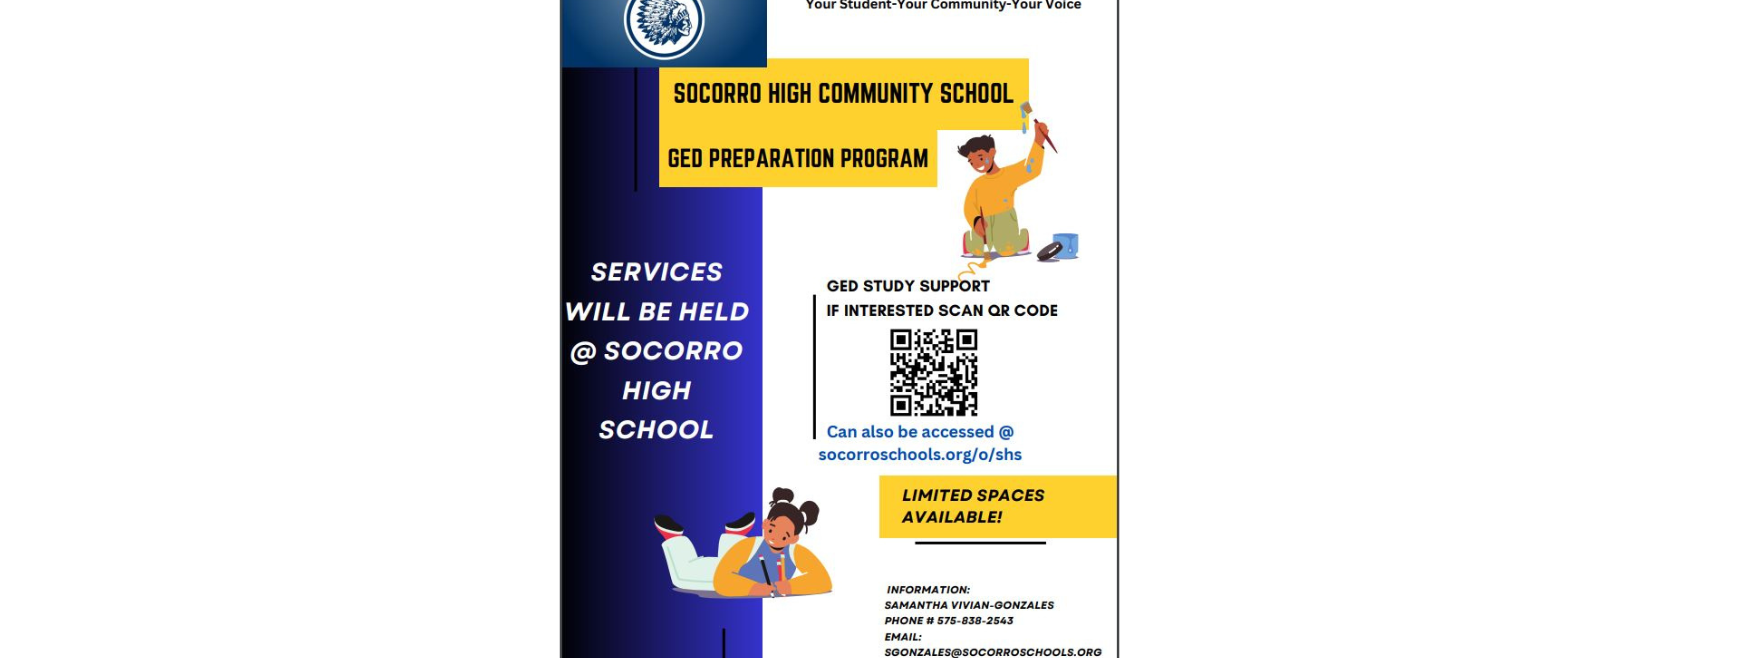 Your Student-Your Community-Your Voice SOCORRO HIGH COMMUNITY SCHOOL GED PREPARATION PROGRAM SERVICES WILL BE HELD @SOCORRO HIGH SCHOOL GED STUDY SUPPORT IF INTERESTED SCAN QR CODE Can also be accessed @ socorroschools.org/o/shs LIMITED SPACES AVAILABLE! INFORMATION: SAMANTHA VIVIAN-GONZALES PHONE # 575-838-2543 EMAIL: SGONZALES@SOCORROSCHOOLS.ORG